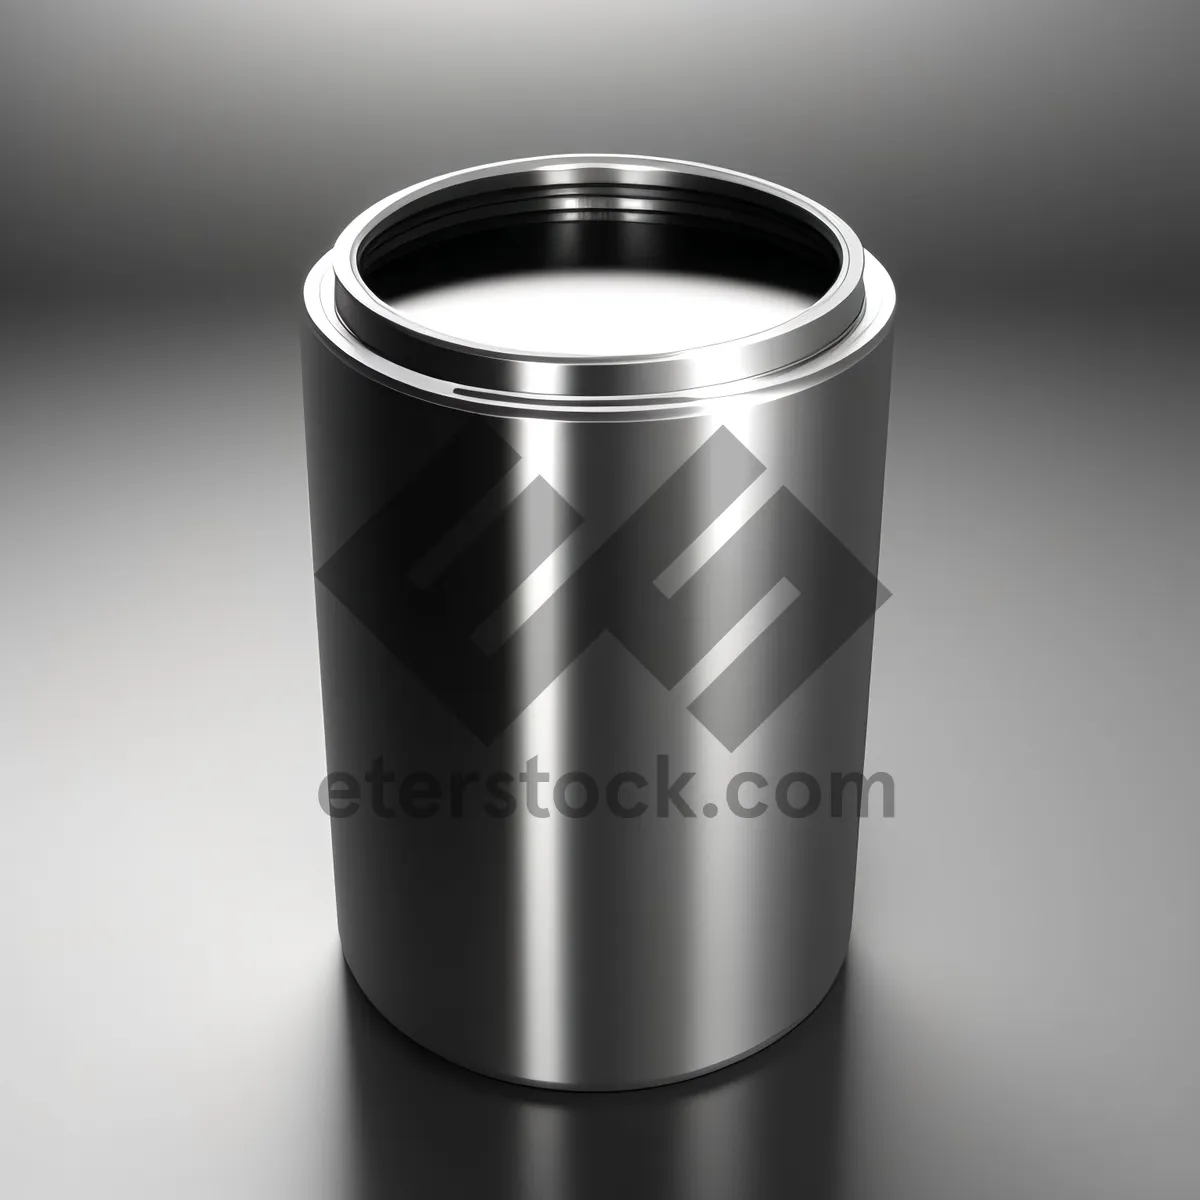 Picture of Silver Steel Tin Can Container